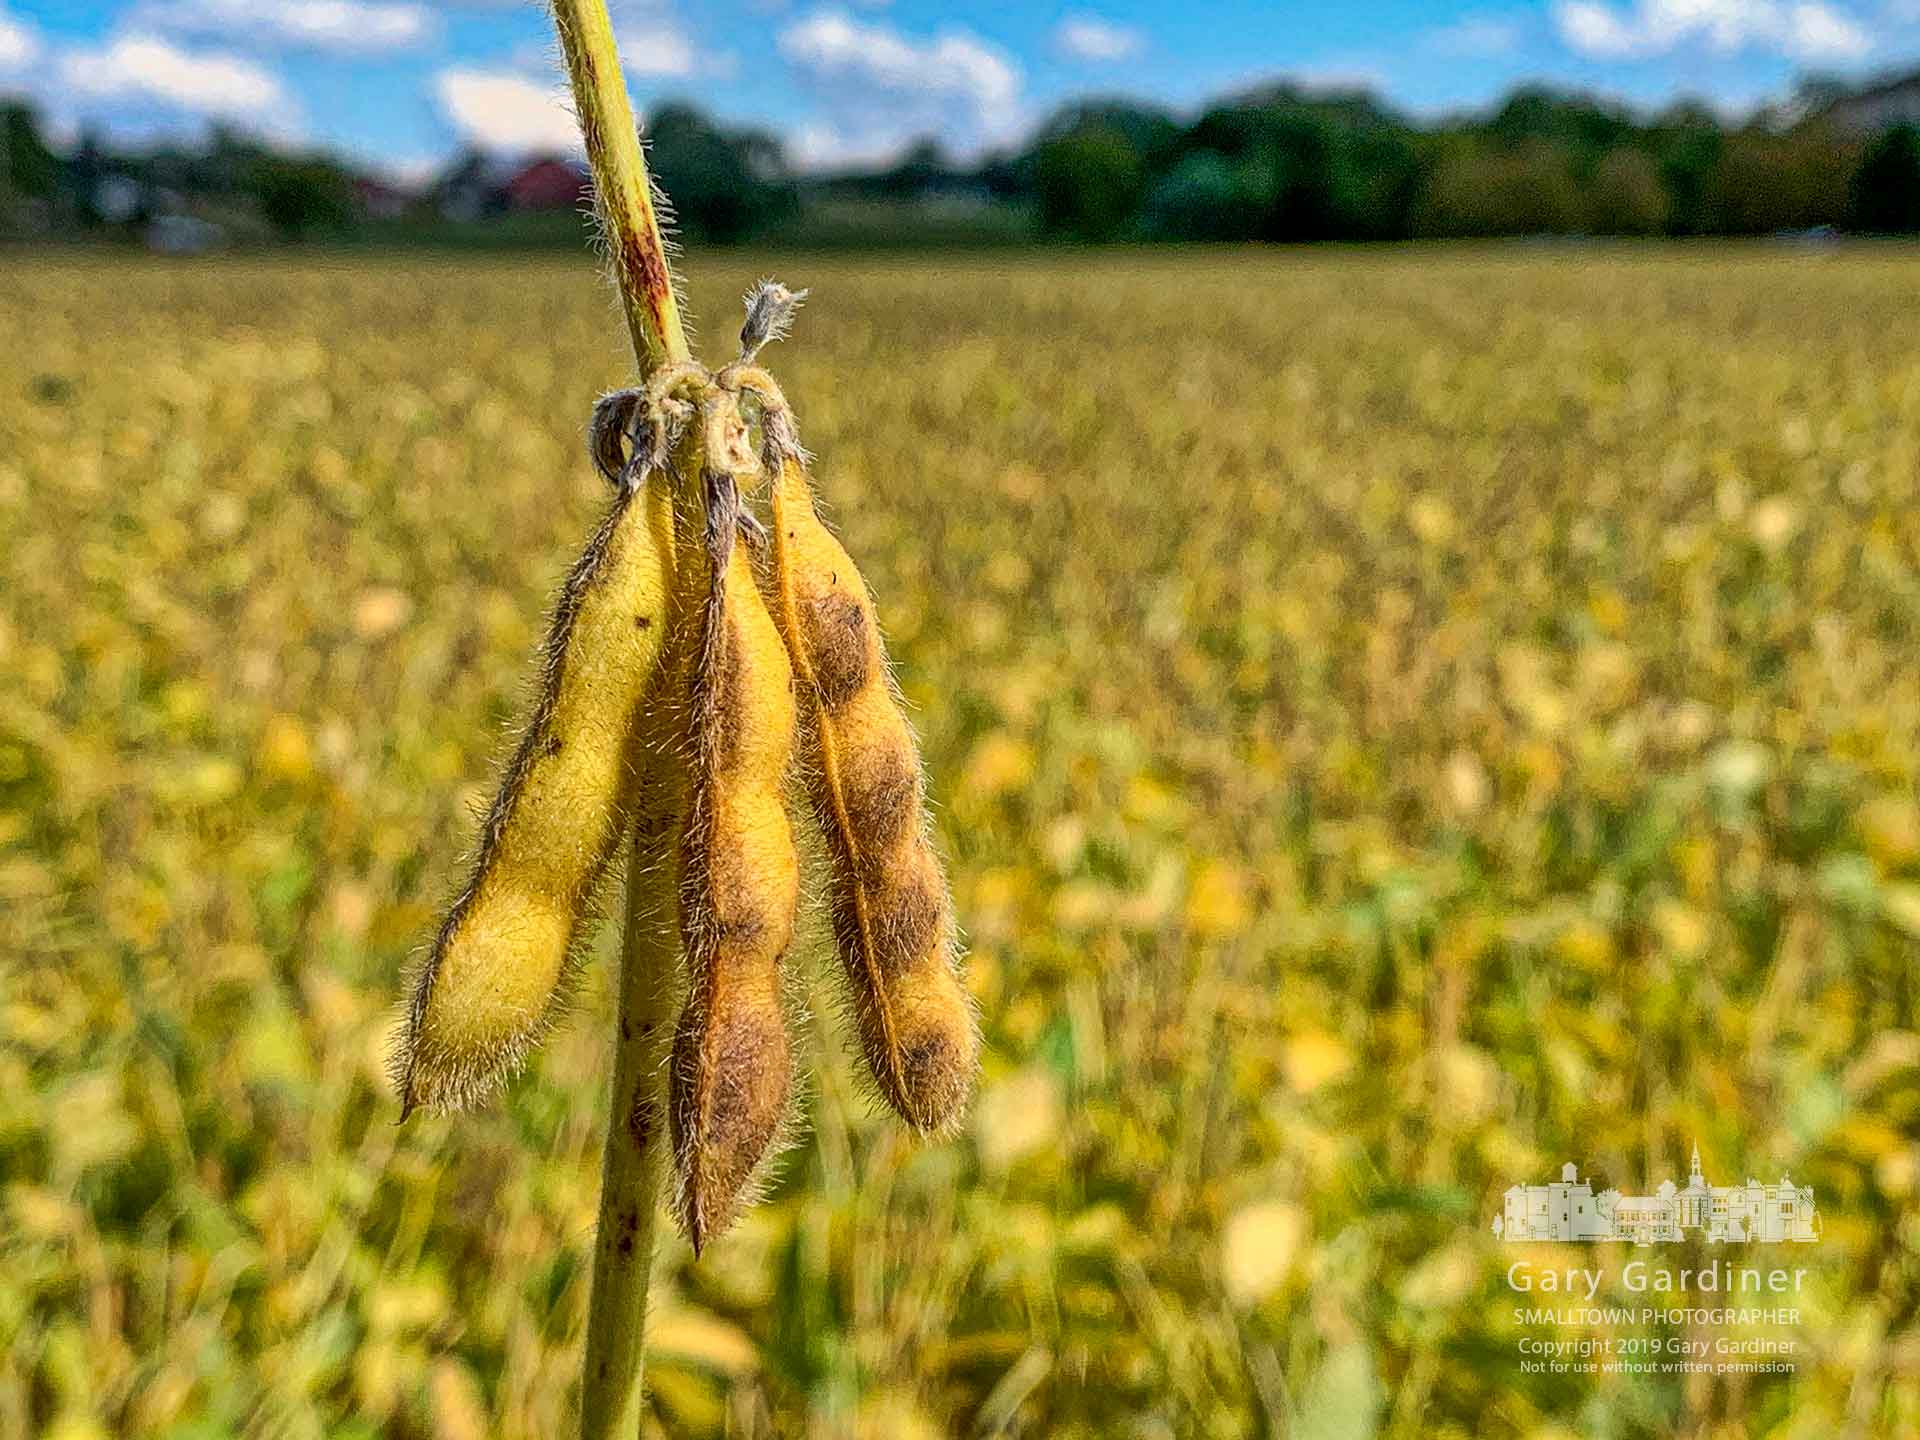 Soybeans turned yellow preparing for harvest in one of the fields at the Yarnell Farm on Cleveland Ave. My Final Photo for Sept. 23, 2019.